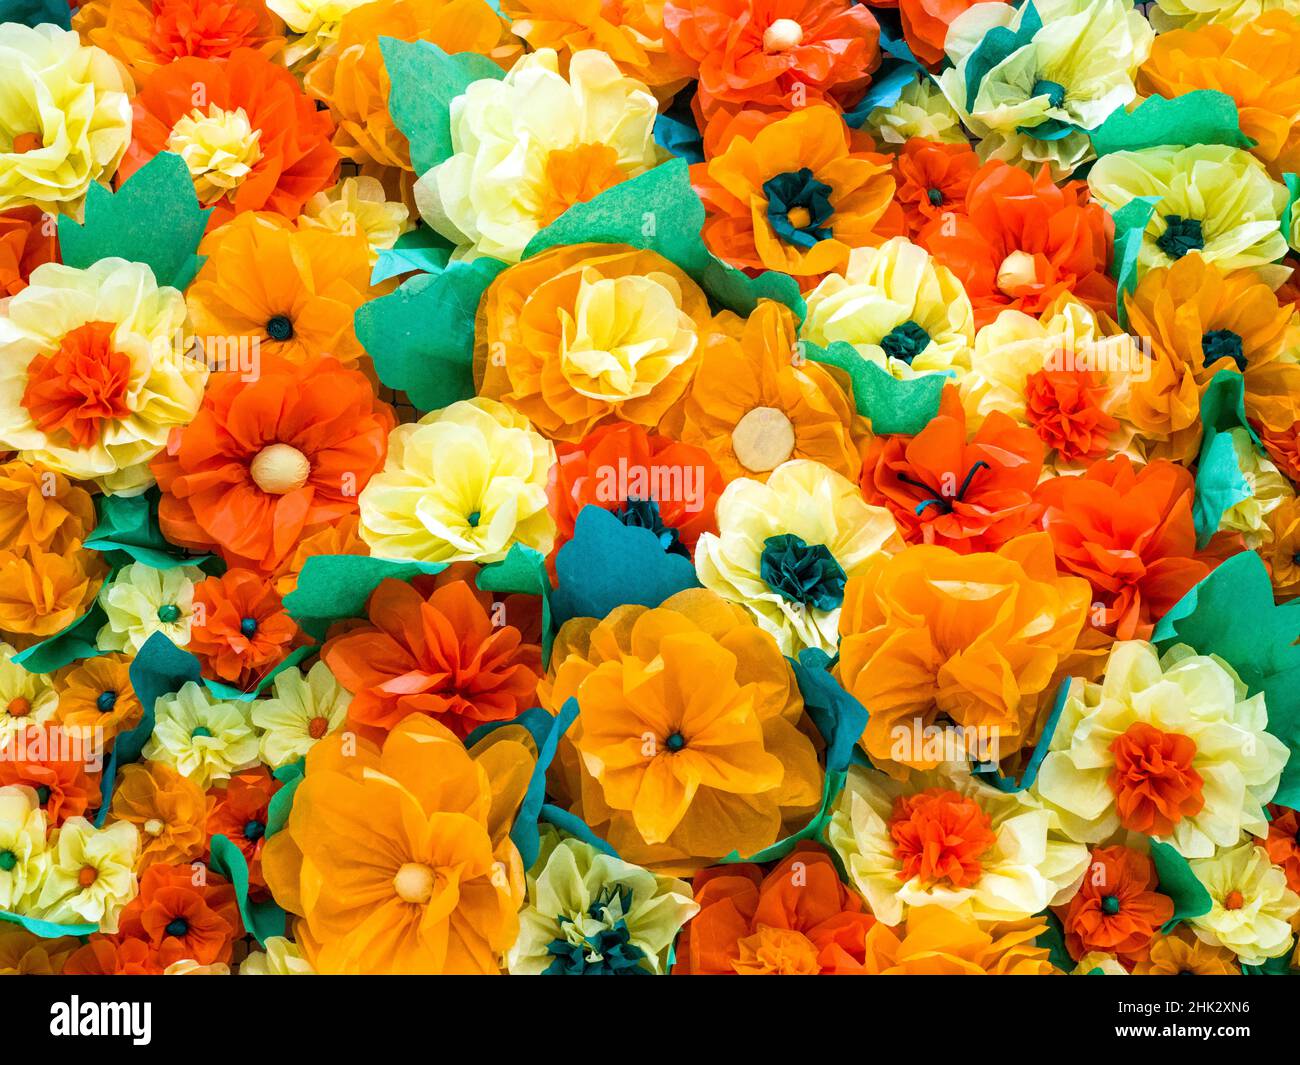 Colorful Mexican Paper Flowers Handicrafts White Pink Yellow Orange Red  Mexican Market Square San Antonio Texas Stock Photo - Alamy